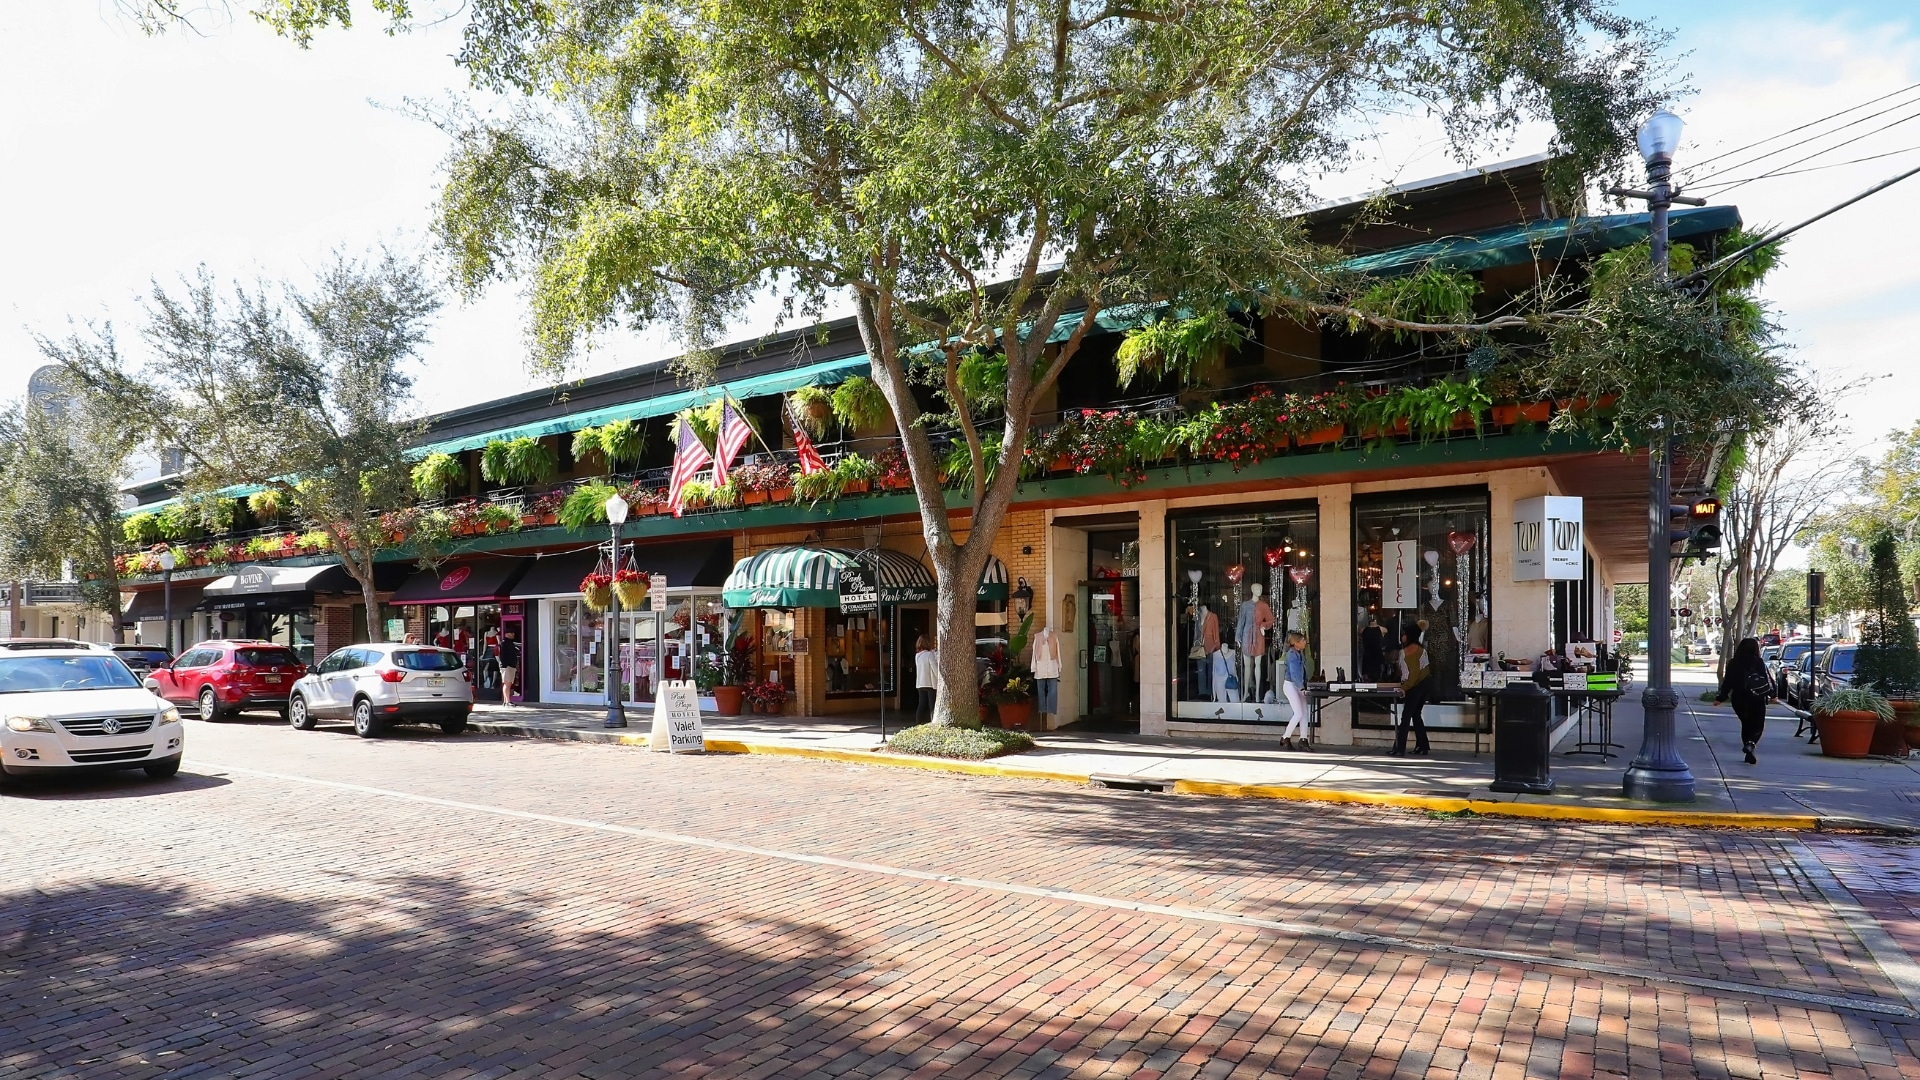 Winter Park Florida in the Summer